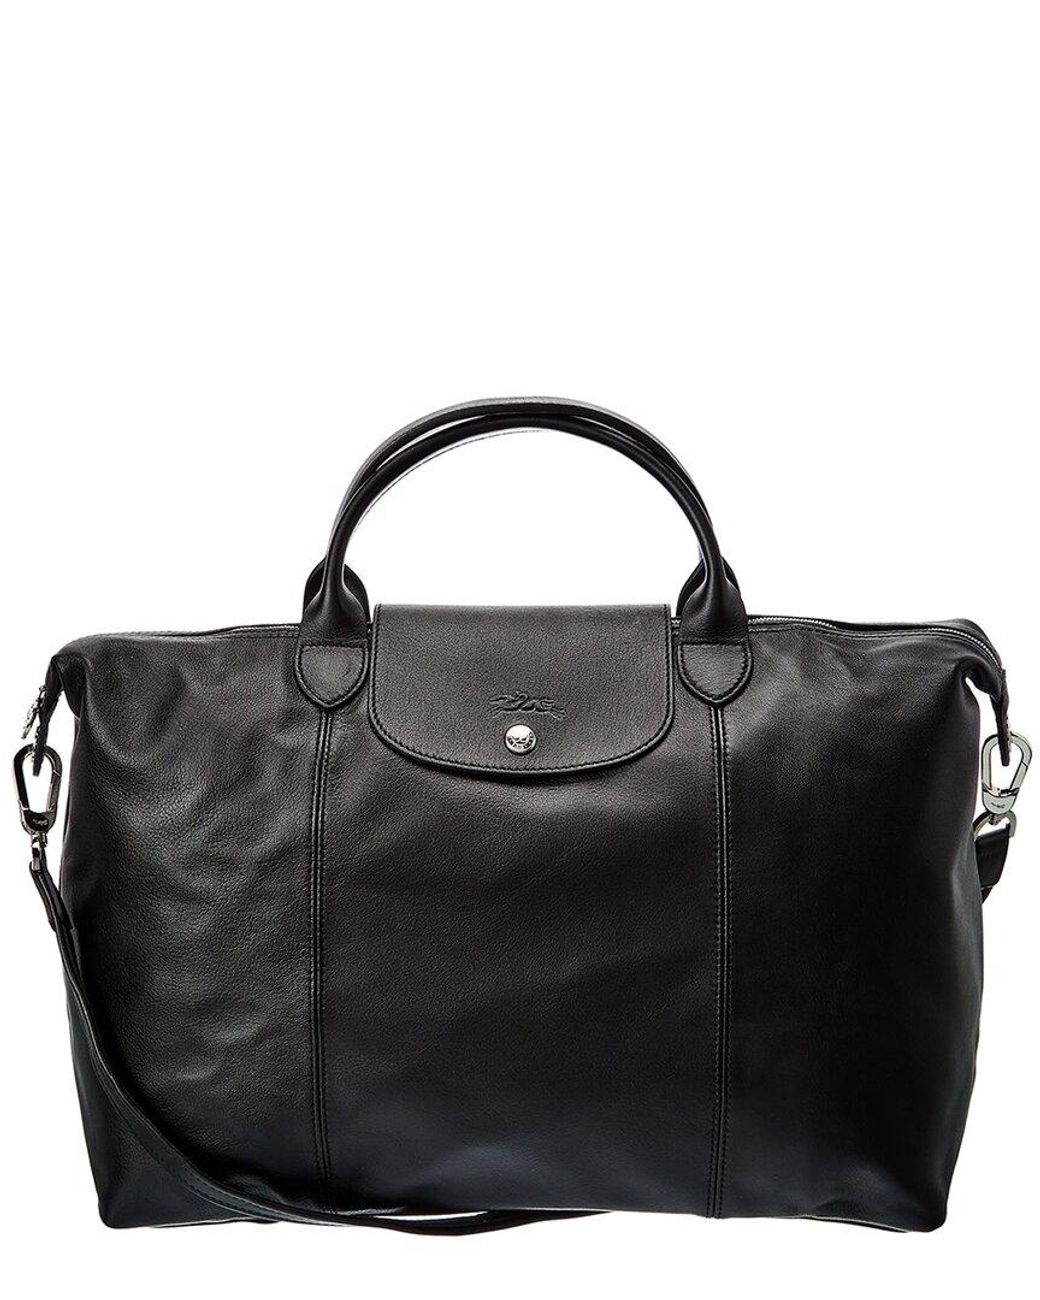 Longchamp Le Pliage Cuir Large Leather Short Handle Tote in Black | Lyst